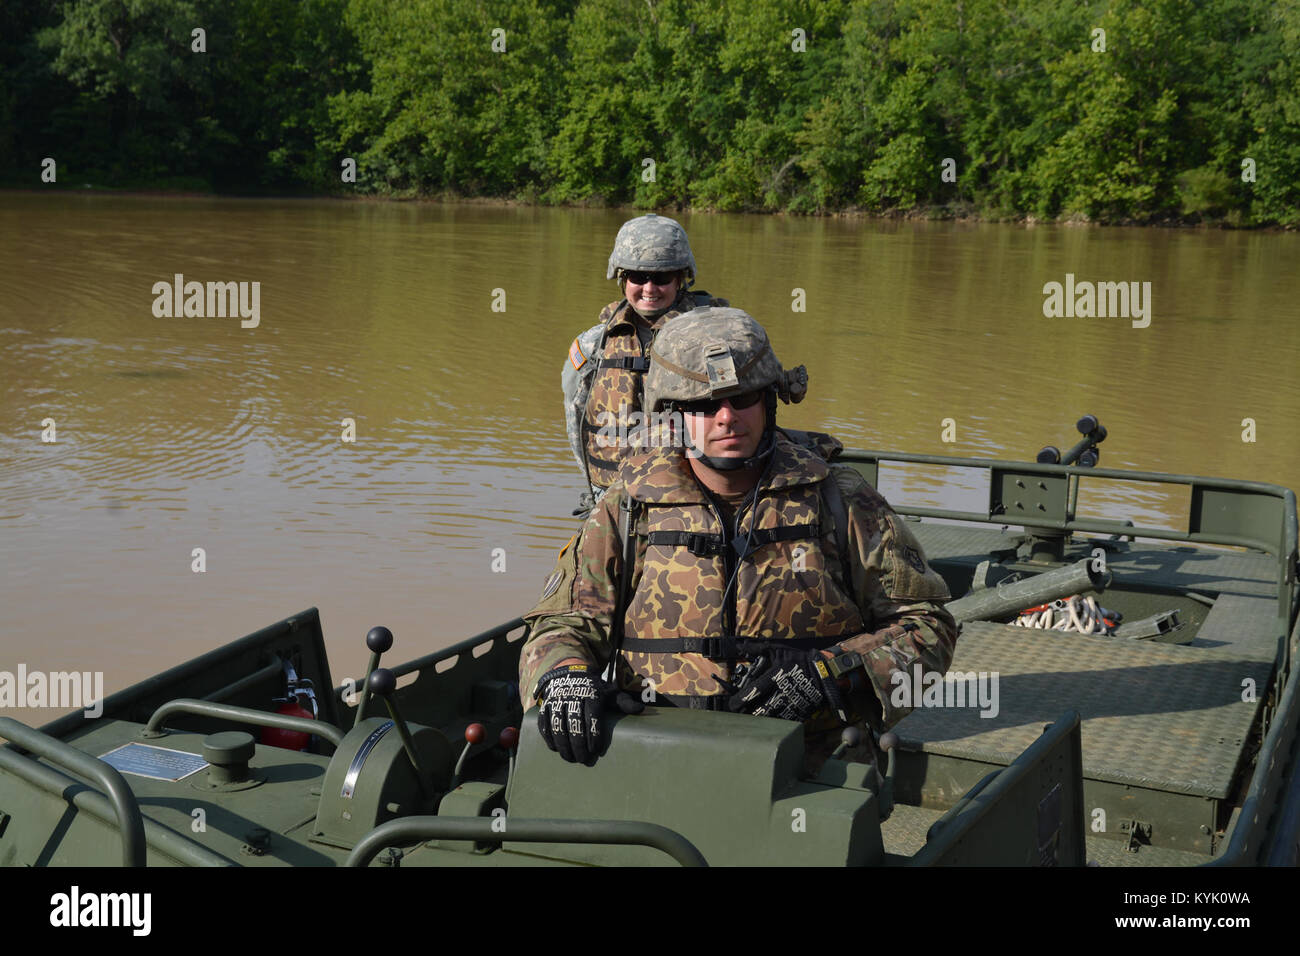 SSG David Fox of the 2061st Multi Role Bridge Company pilots a MK2 boat as part of annual training at Fort Knox Kentucky on 15 Jul 2016. (Kentucky National Guard photo by Walt Leaumont) Stock Photo